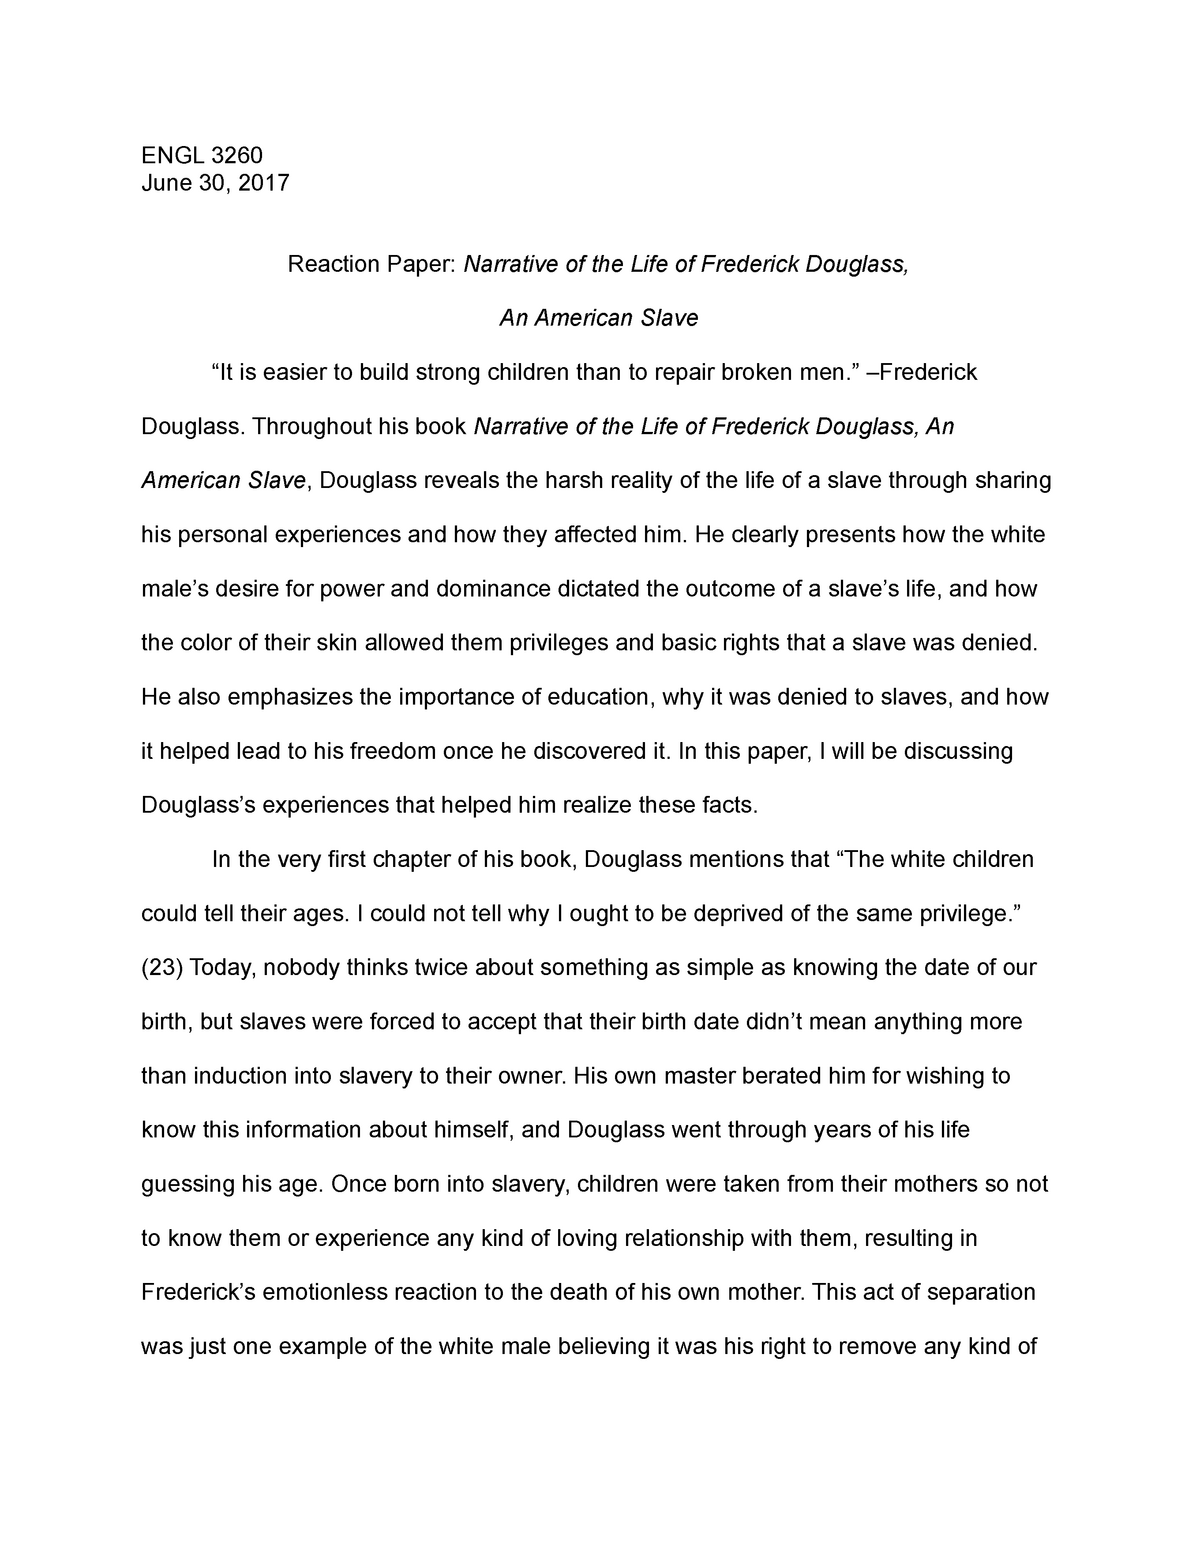 Essay about my country india for kids